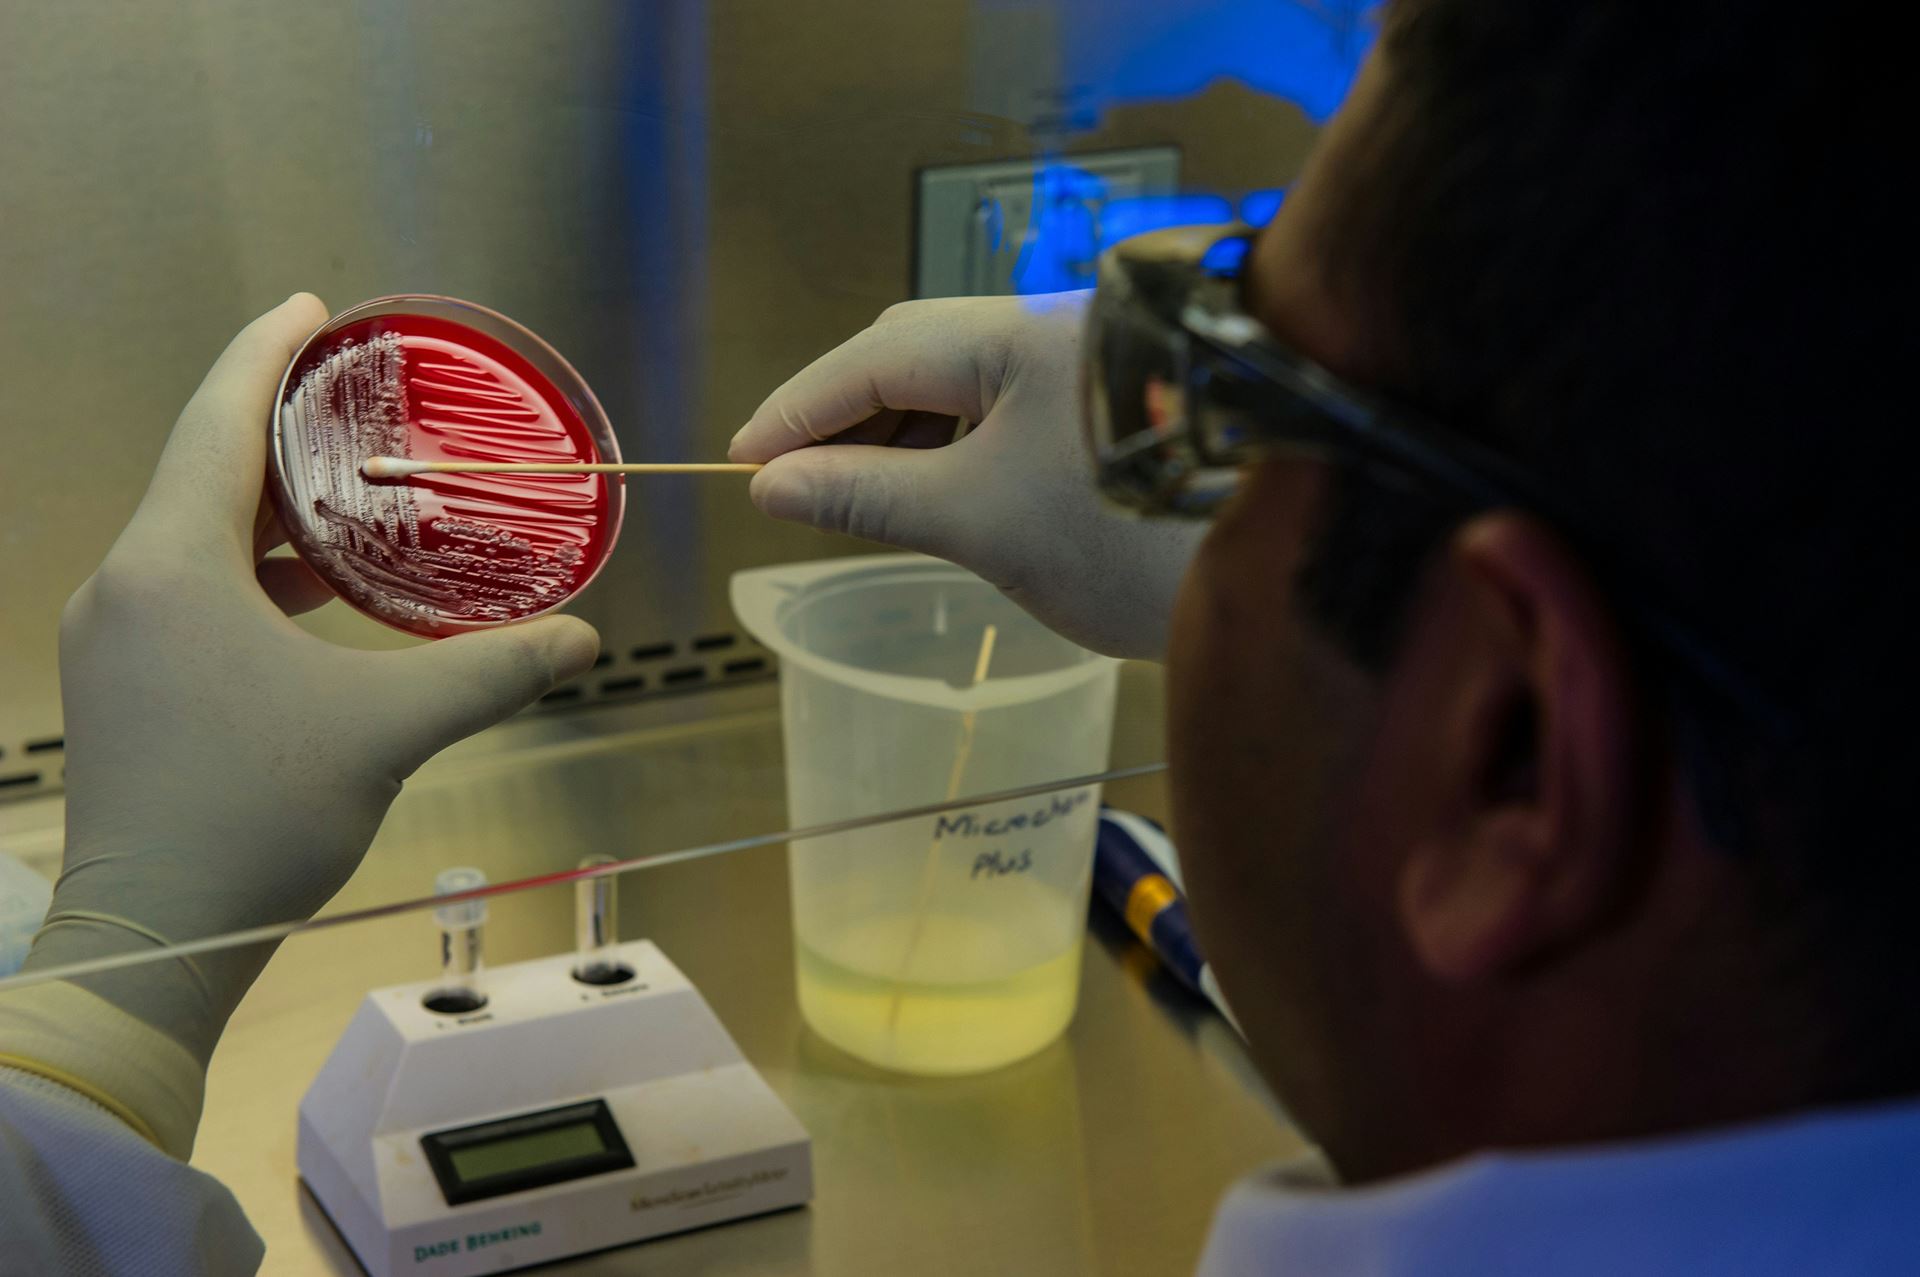 A person wearing gloves holding a petri dish and swabbing it in a laboratory